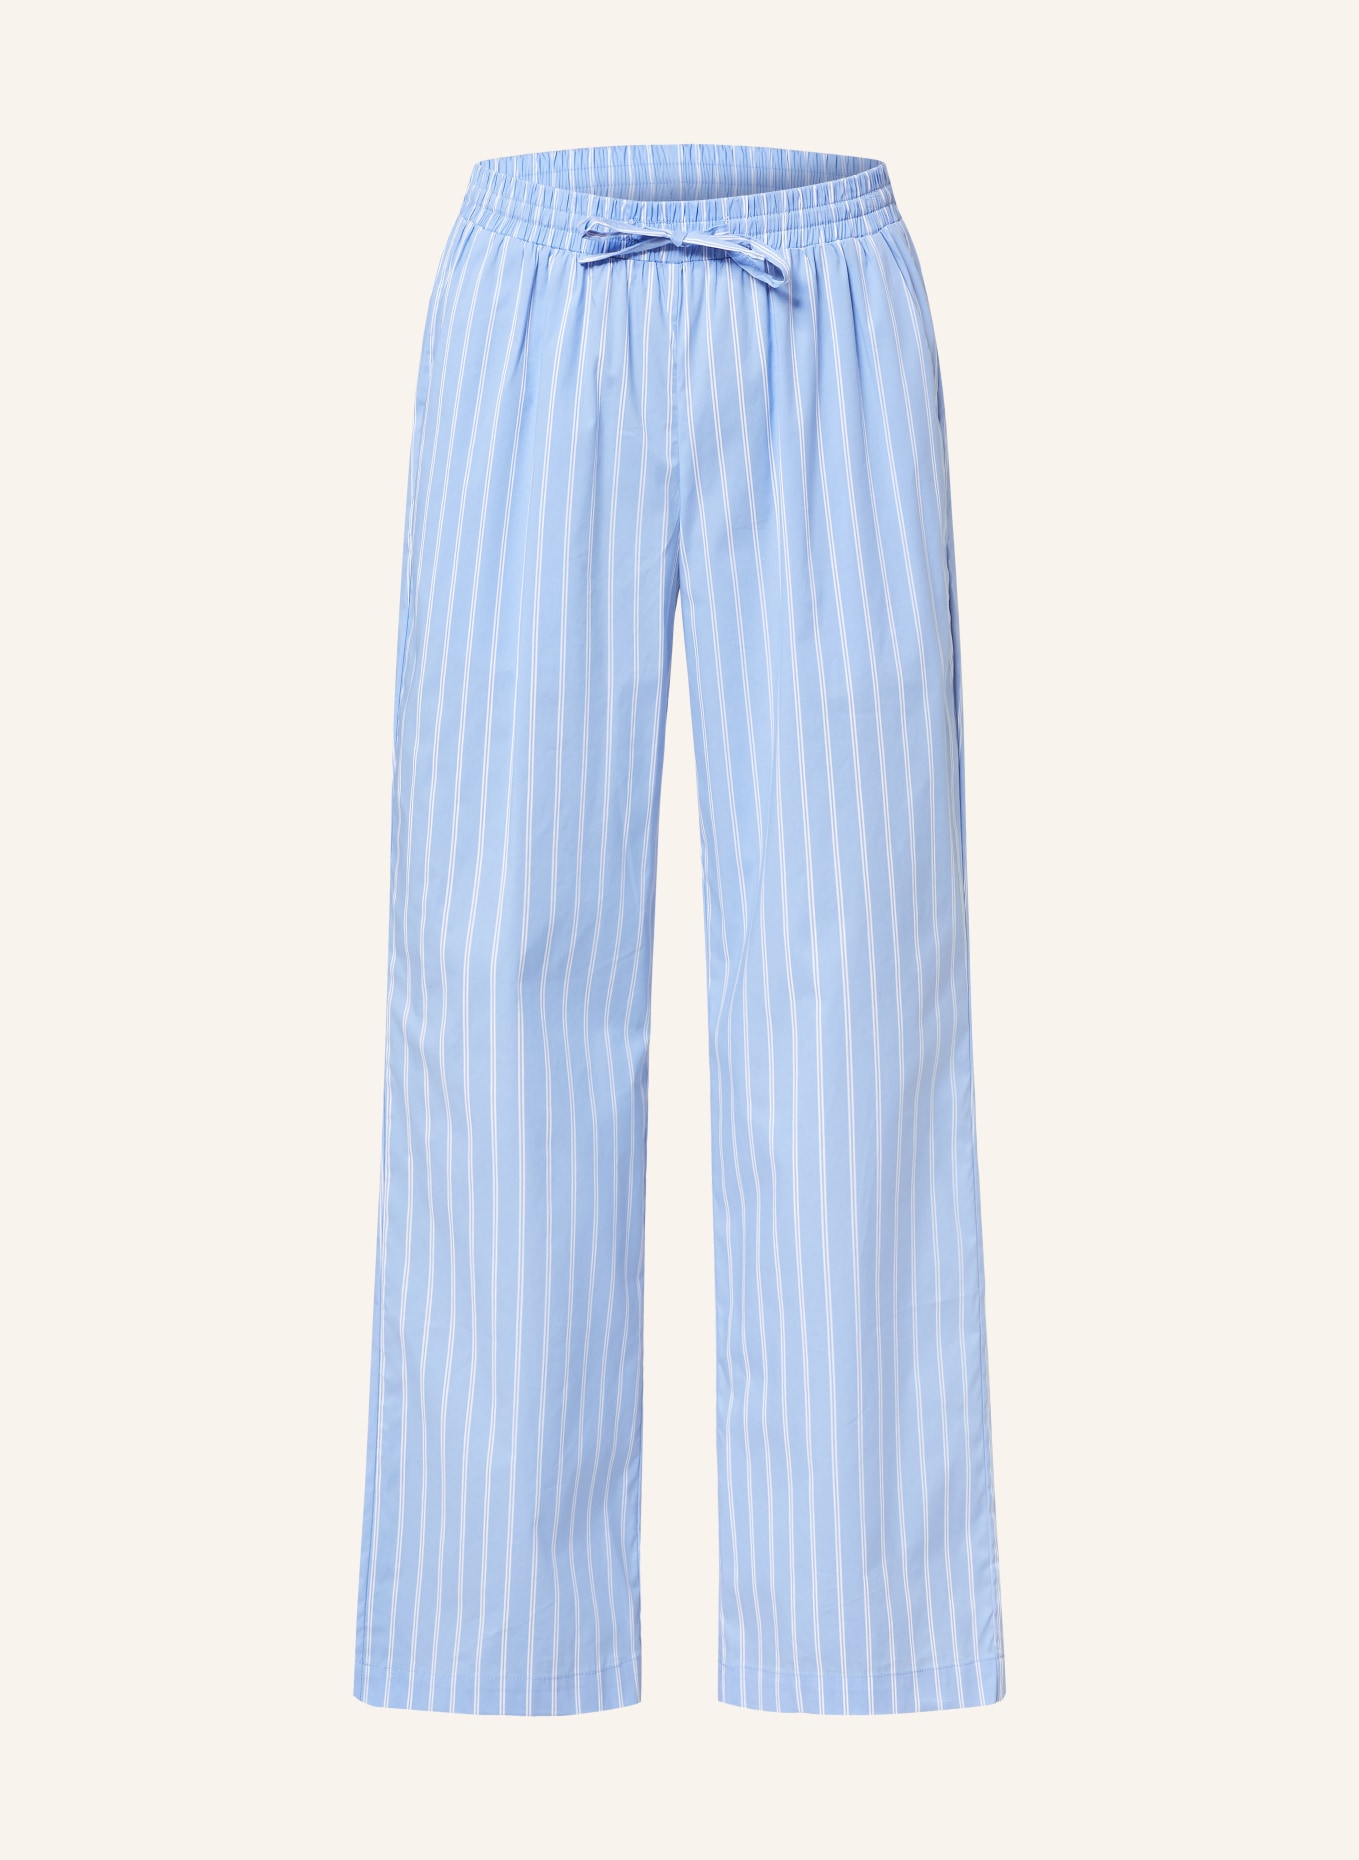 NEO NOIR Trousers SONAR in jogger style, Color: LIGHT BLUE/ WHITE (Image 1)